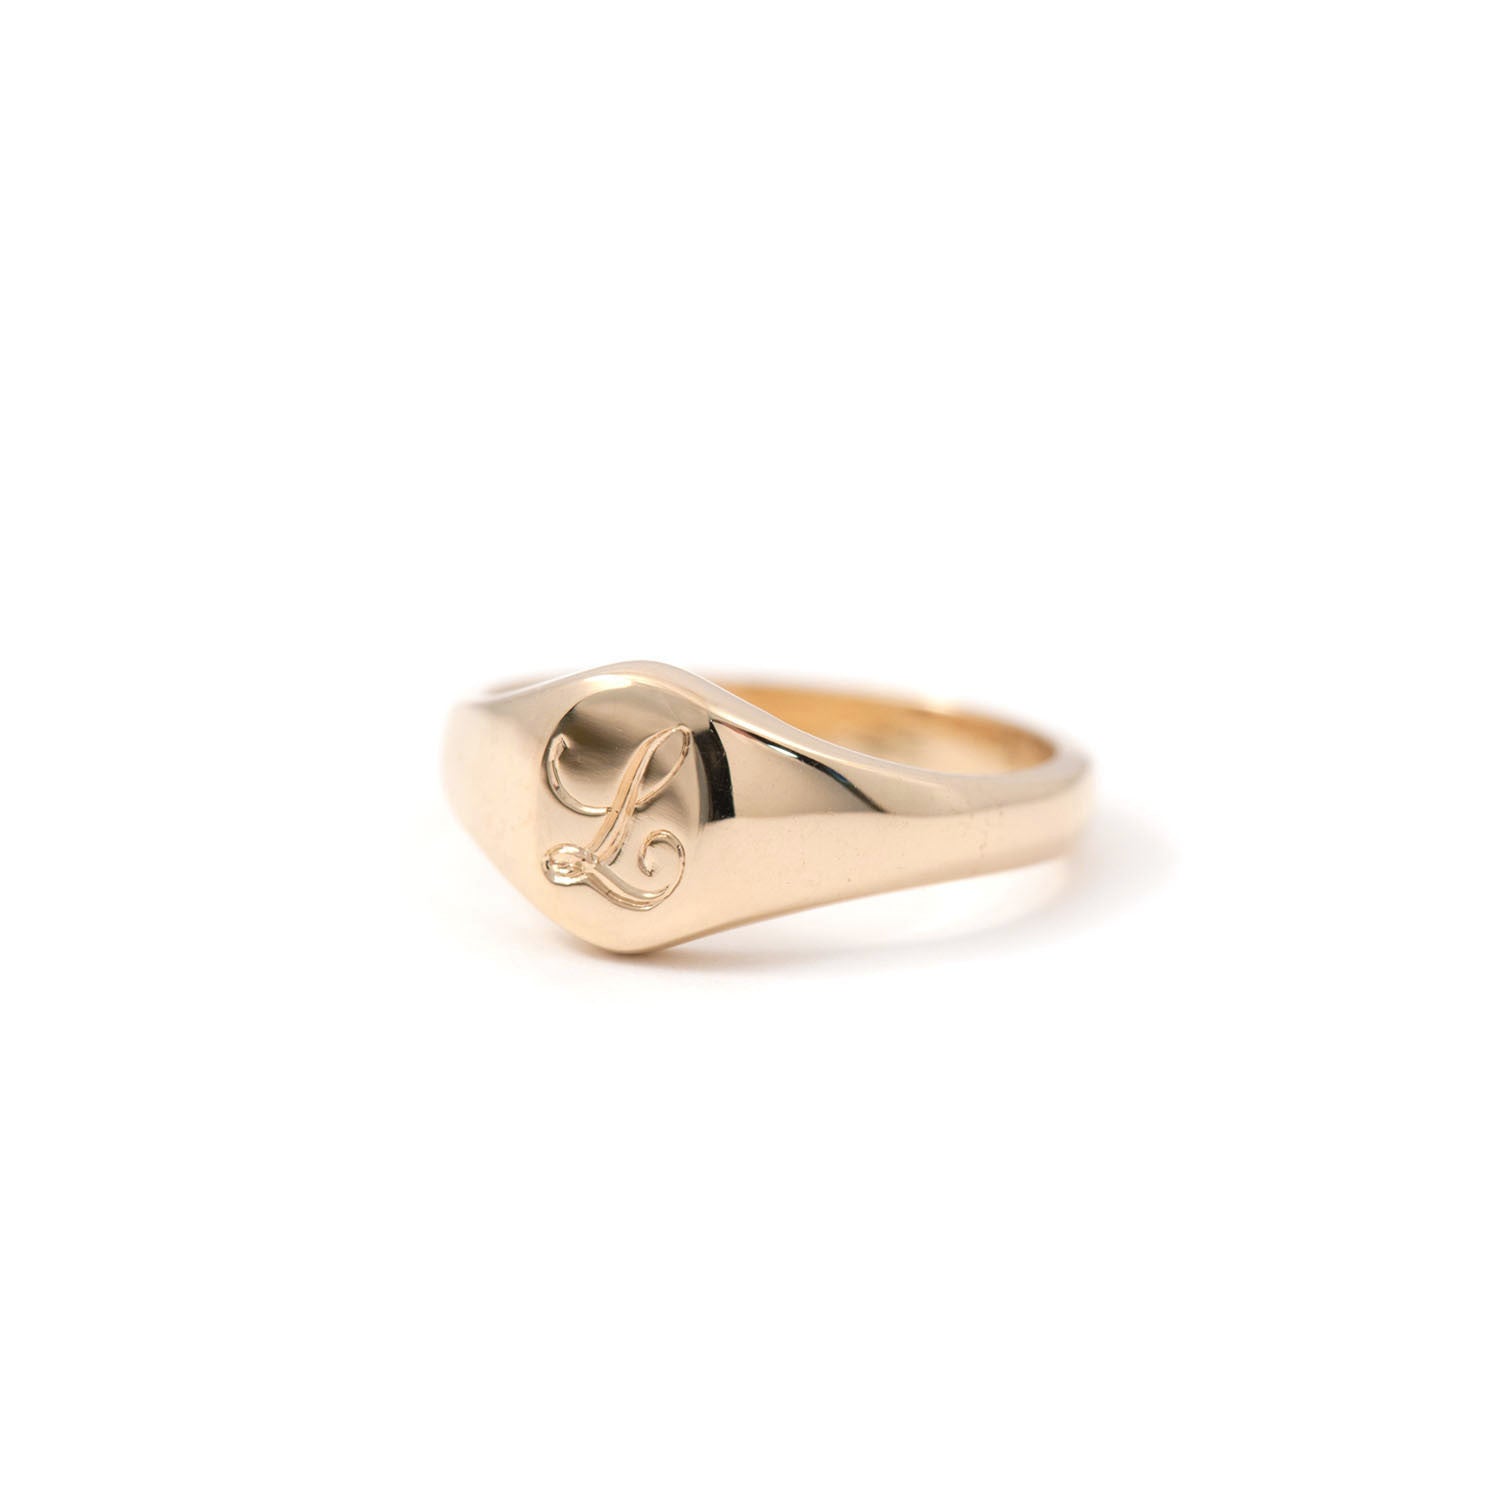 Oval Signet Ring - Small